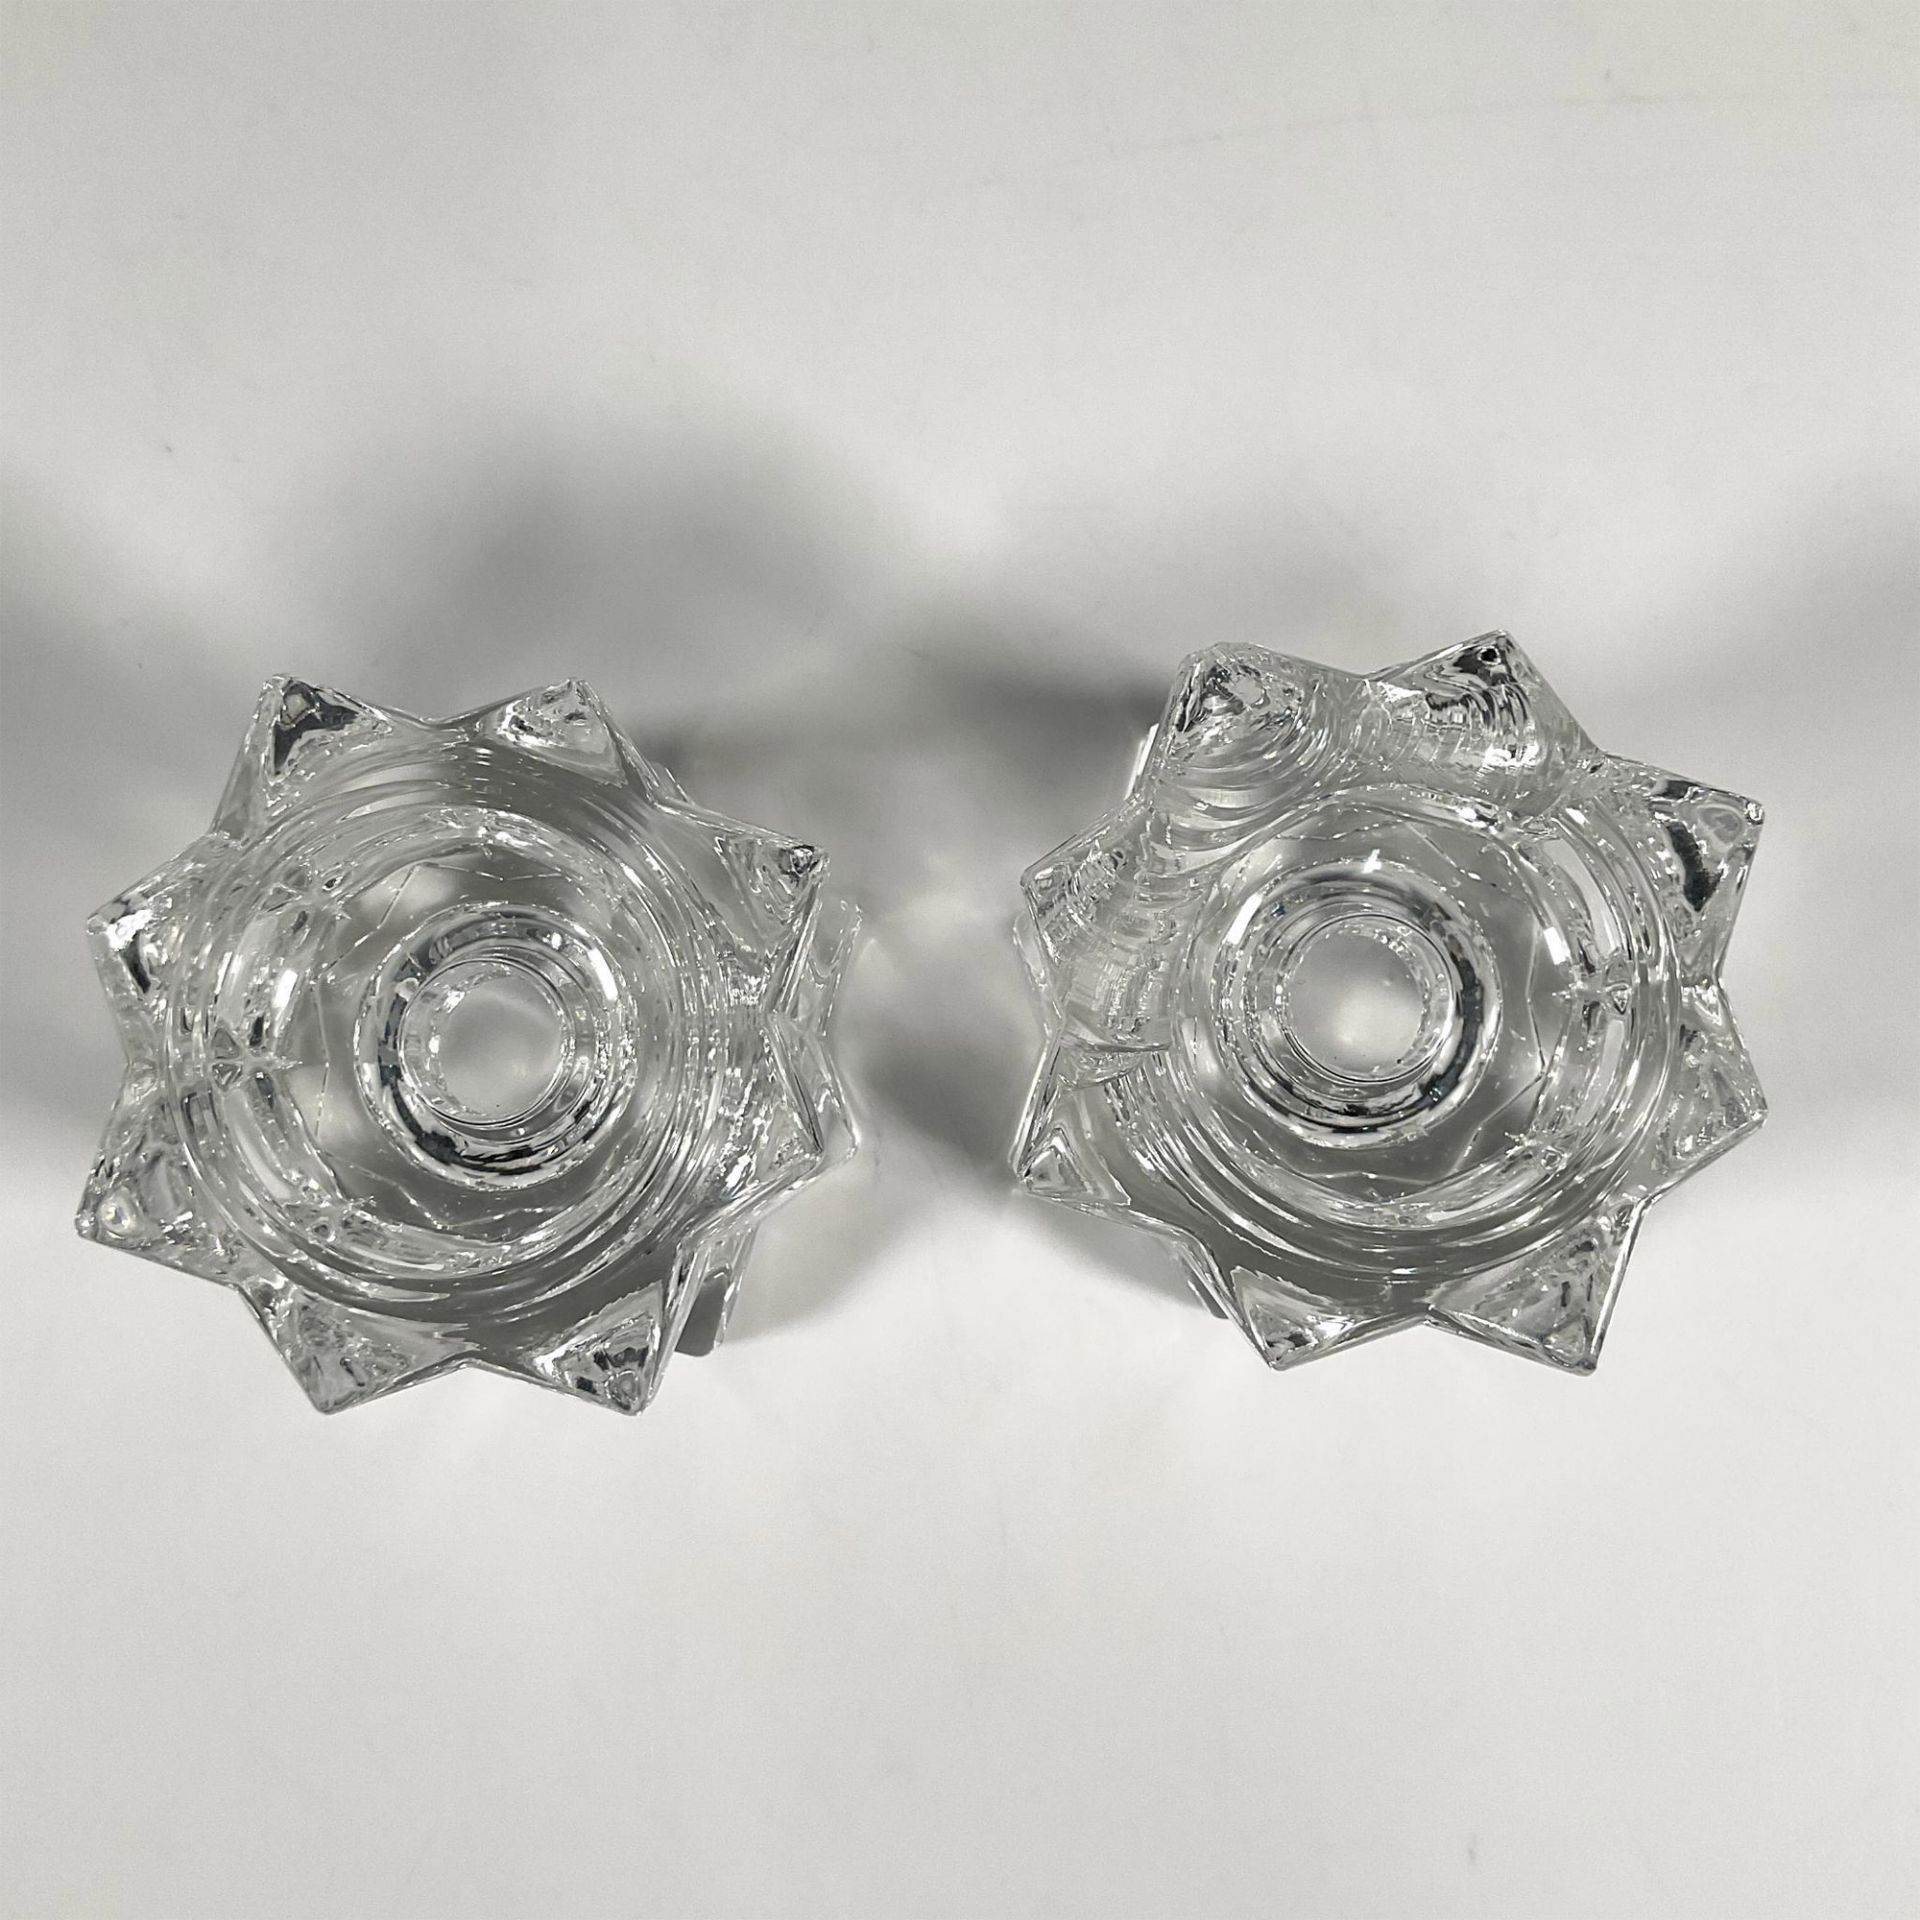 2pc Clear Crystal Candlesticks - Image 3 of 3